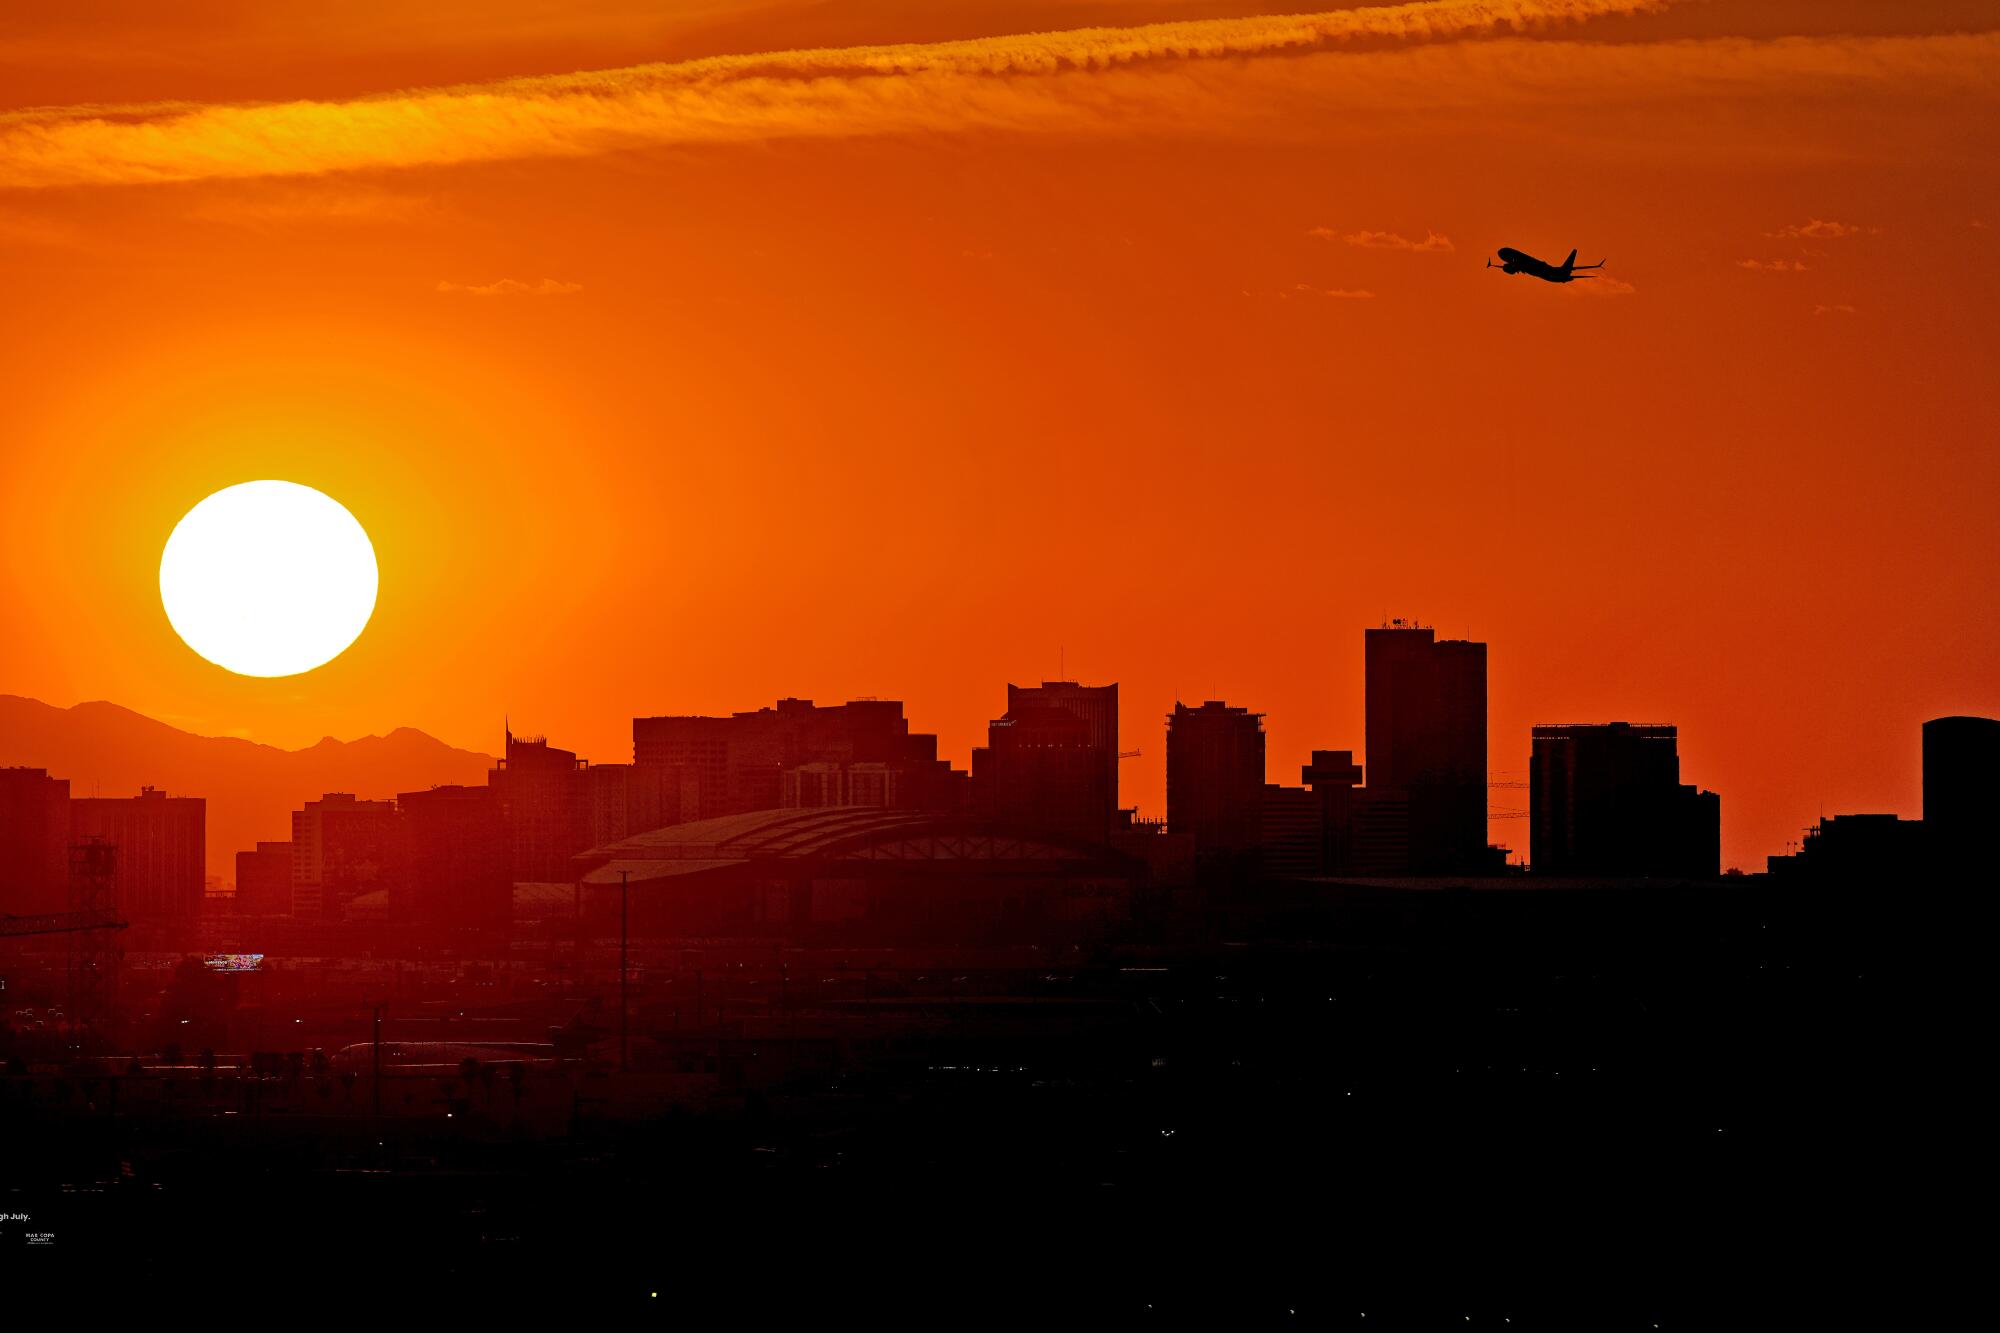 A jet and a city skyline are silhouetted by the sun.